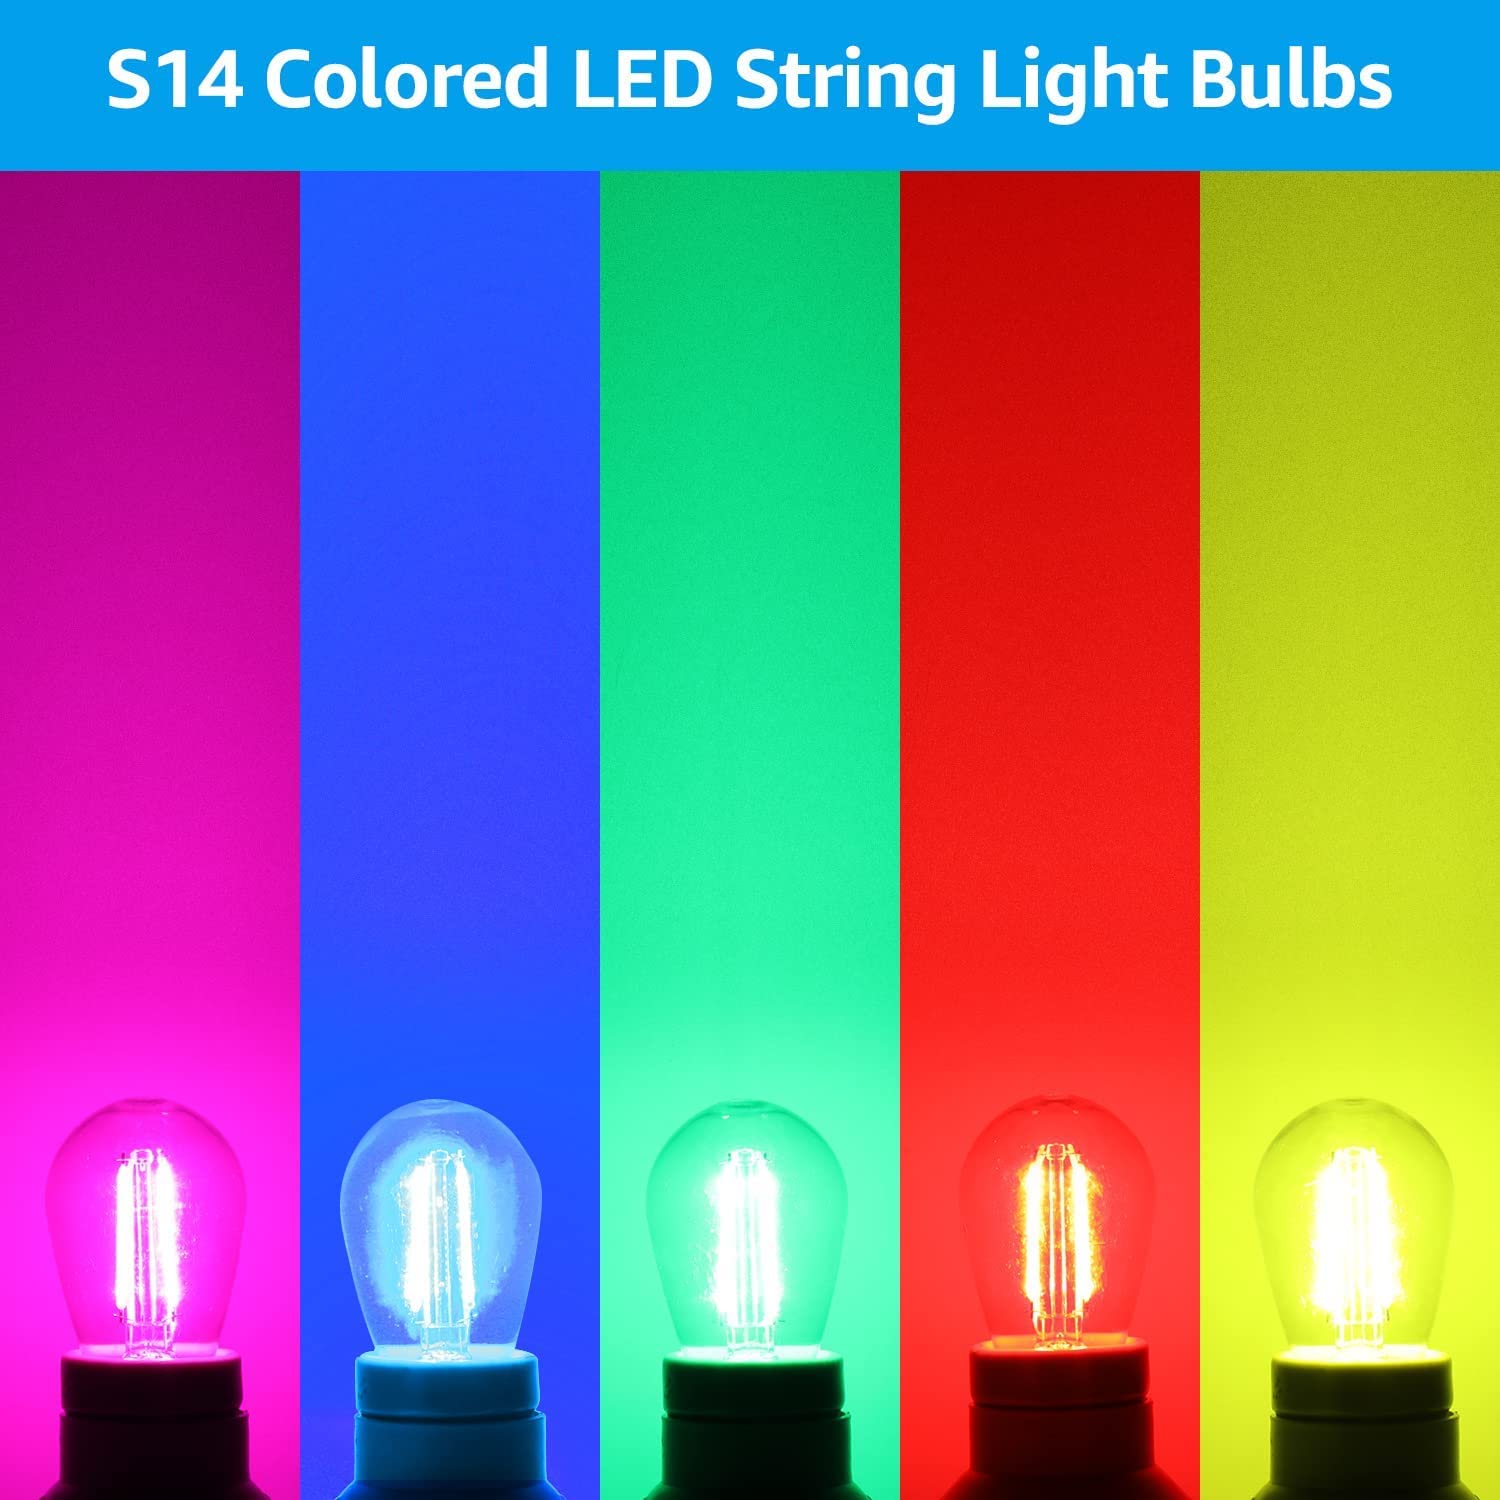 TORCHSTAR SoftRadiance S14 Colored LED String Light Bulbs - 5 colors